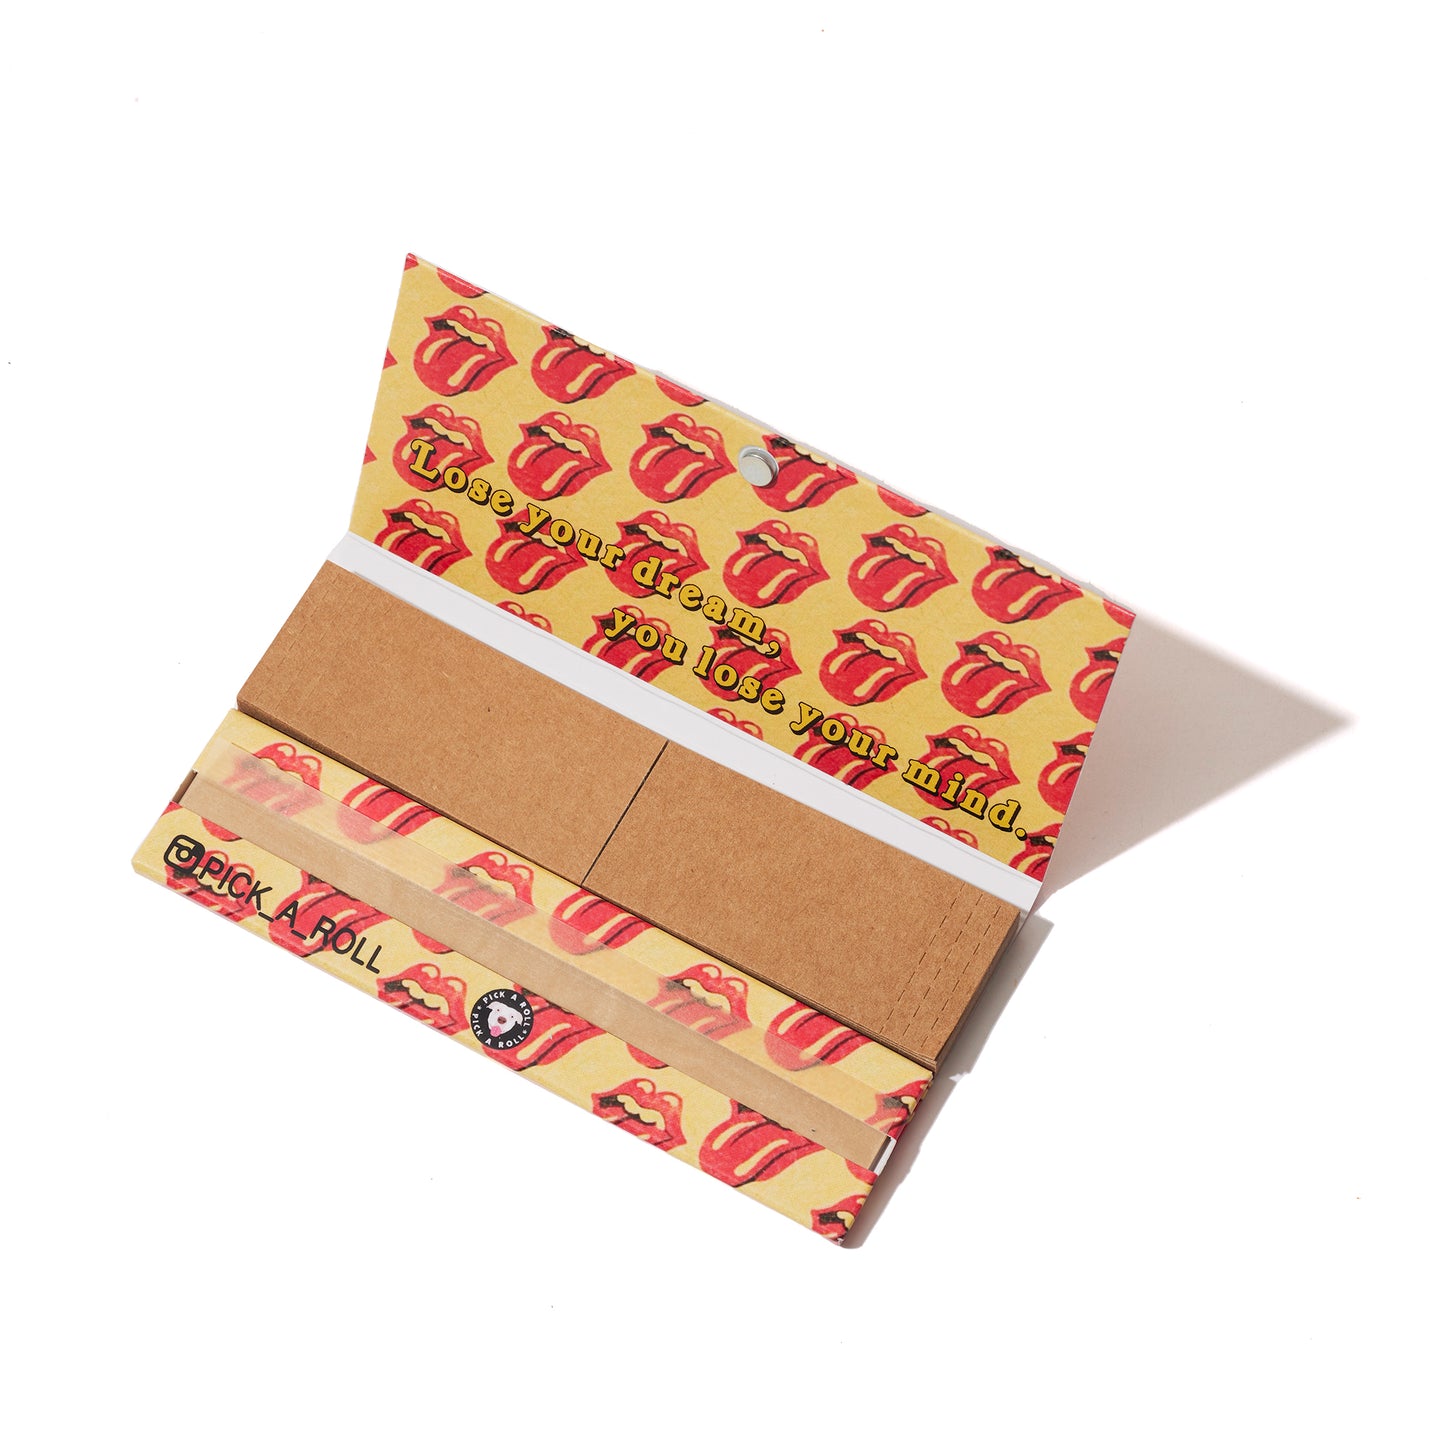 "Rolling Stones" King Size Rolling Papers